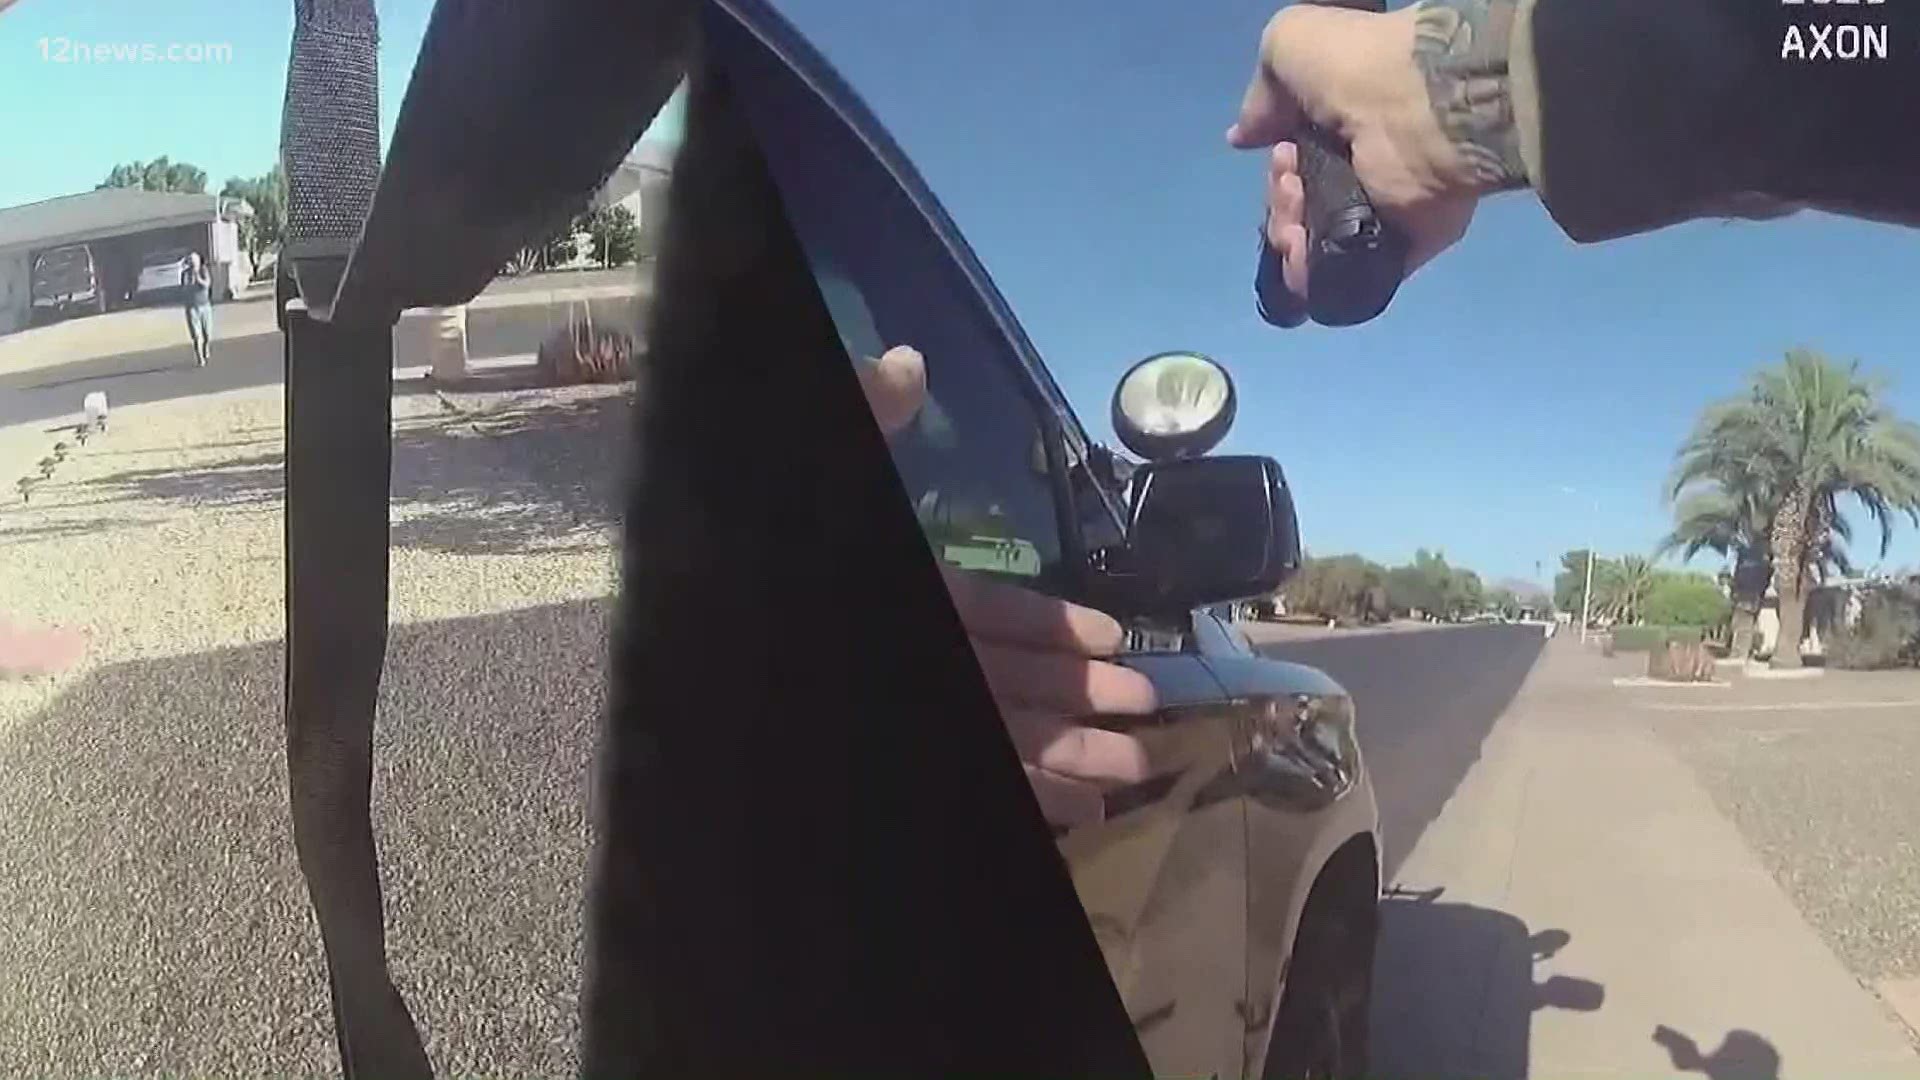 MCSO released body camera footage of a deadly officer-involved shooting near Mesa over the weekend. Deputies say the man was armed with two guns and had to shoot.